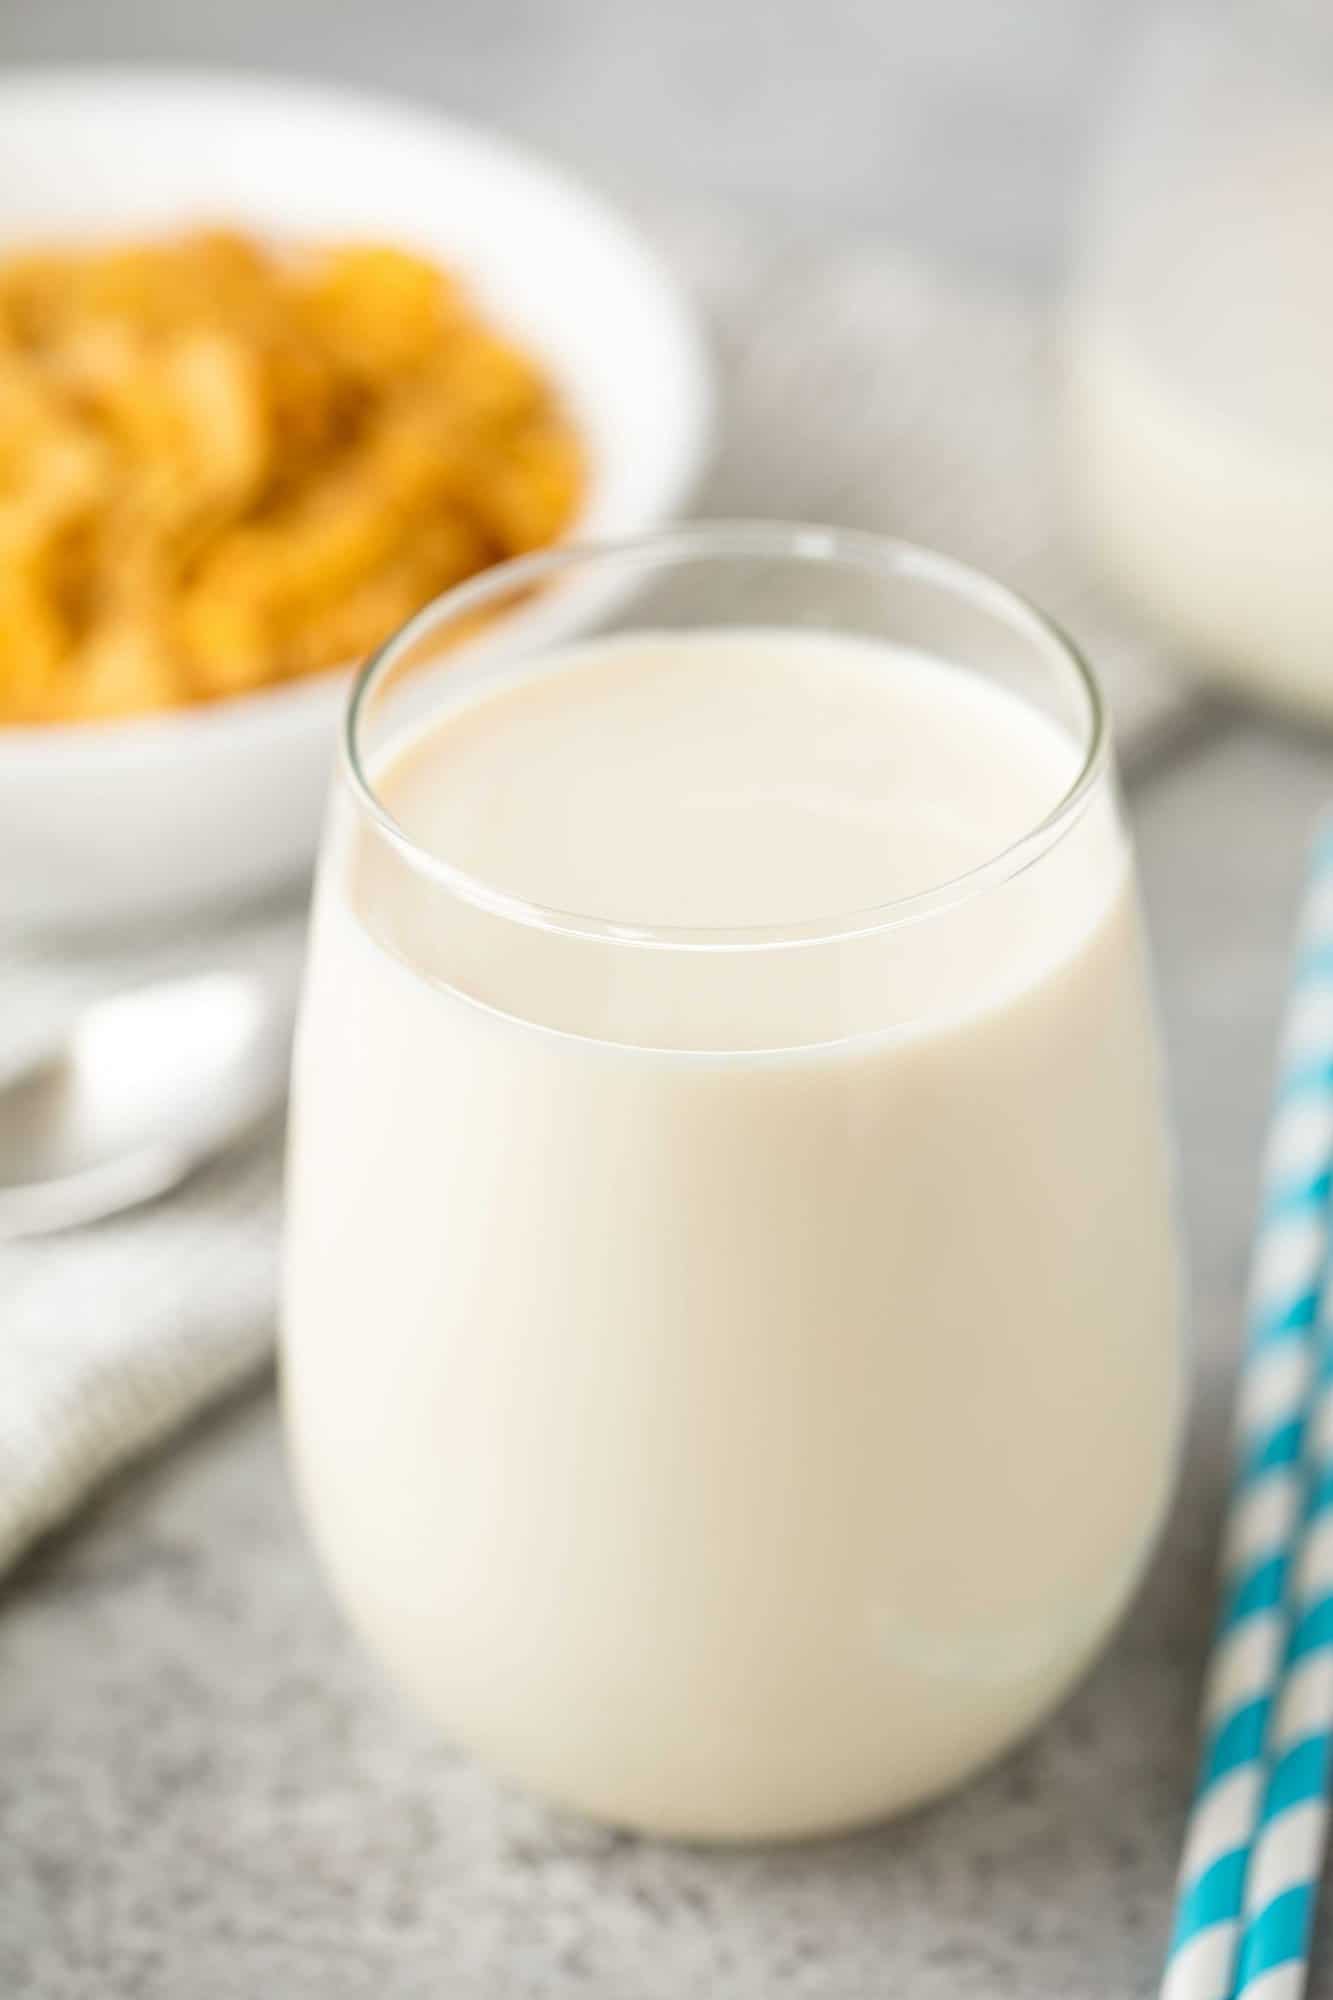 This Momofuku Milk Bar Cereal Milk Copycat recipe is the perfect way to enjoy this New York City trendy favorite at home. It's so amazing you'll be wondering, "why didn't I think of that?"